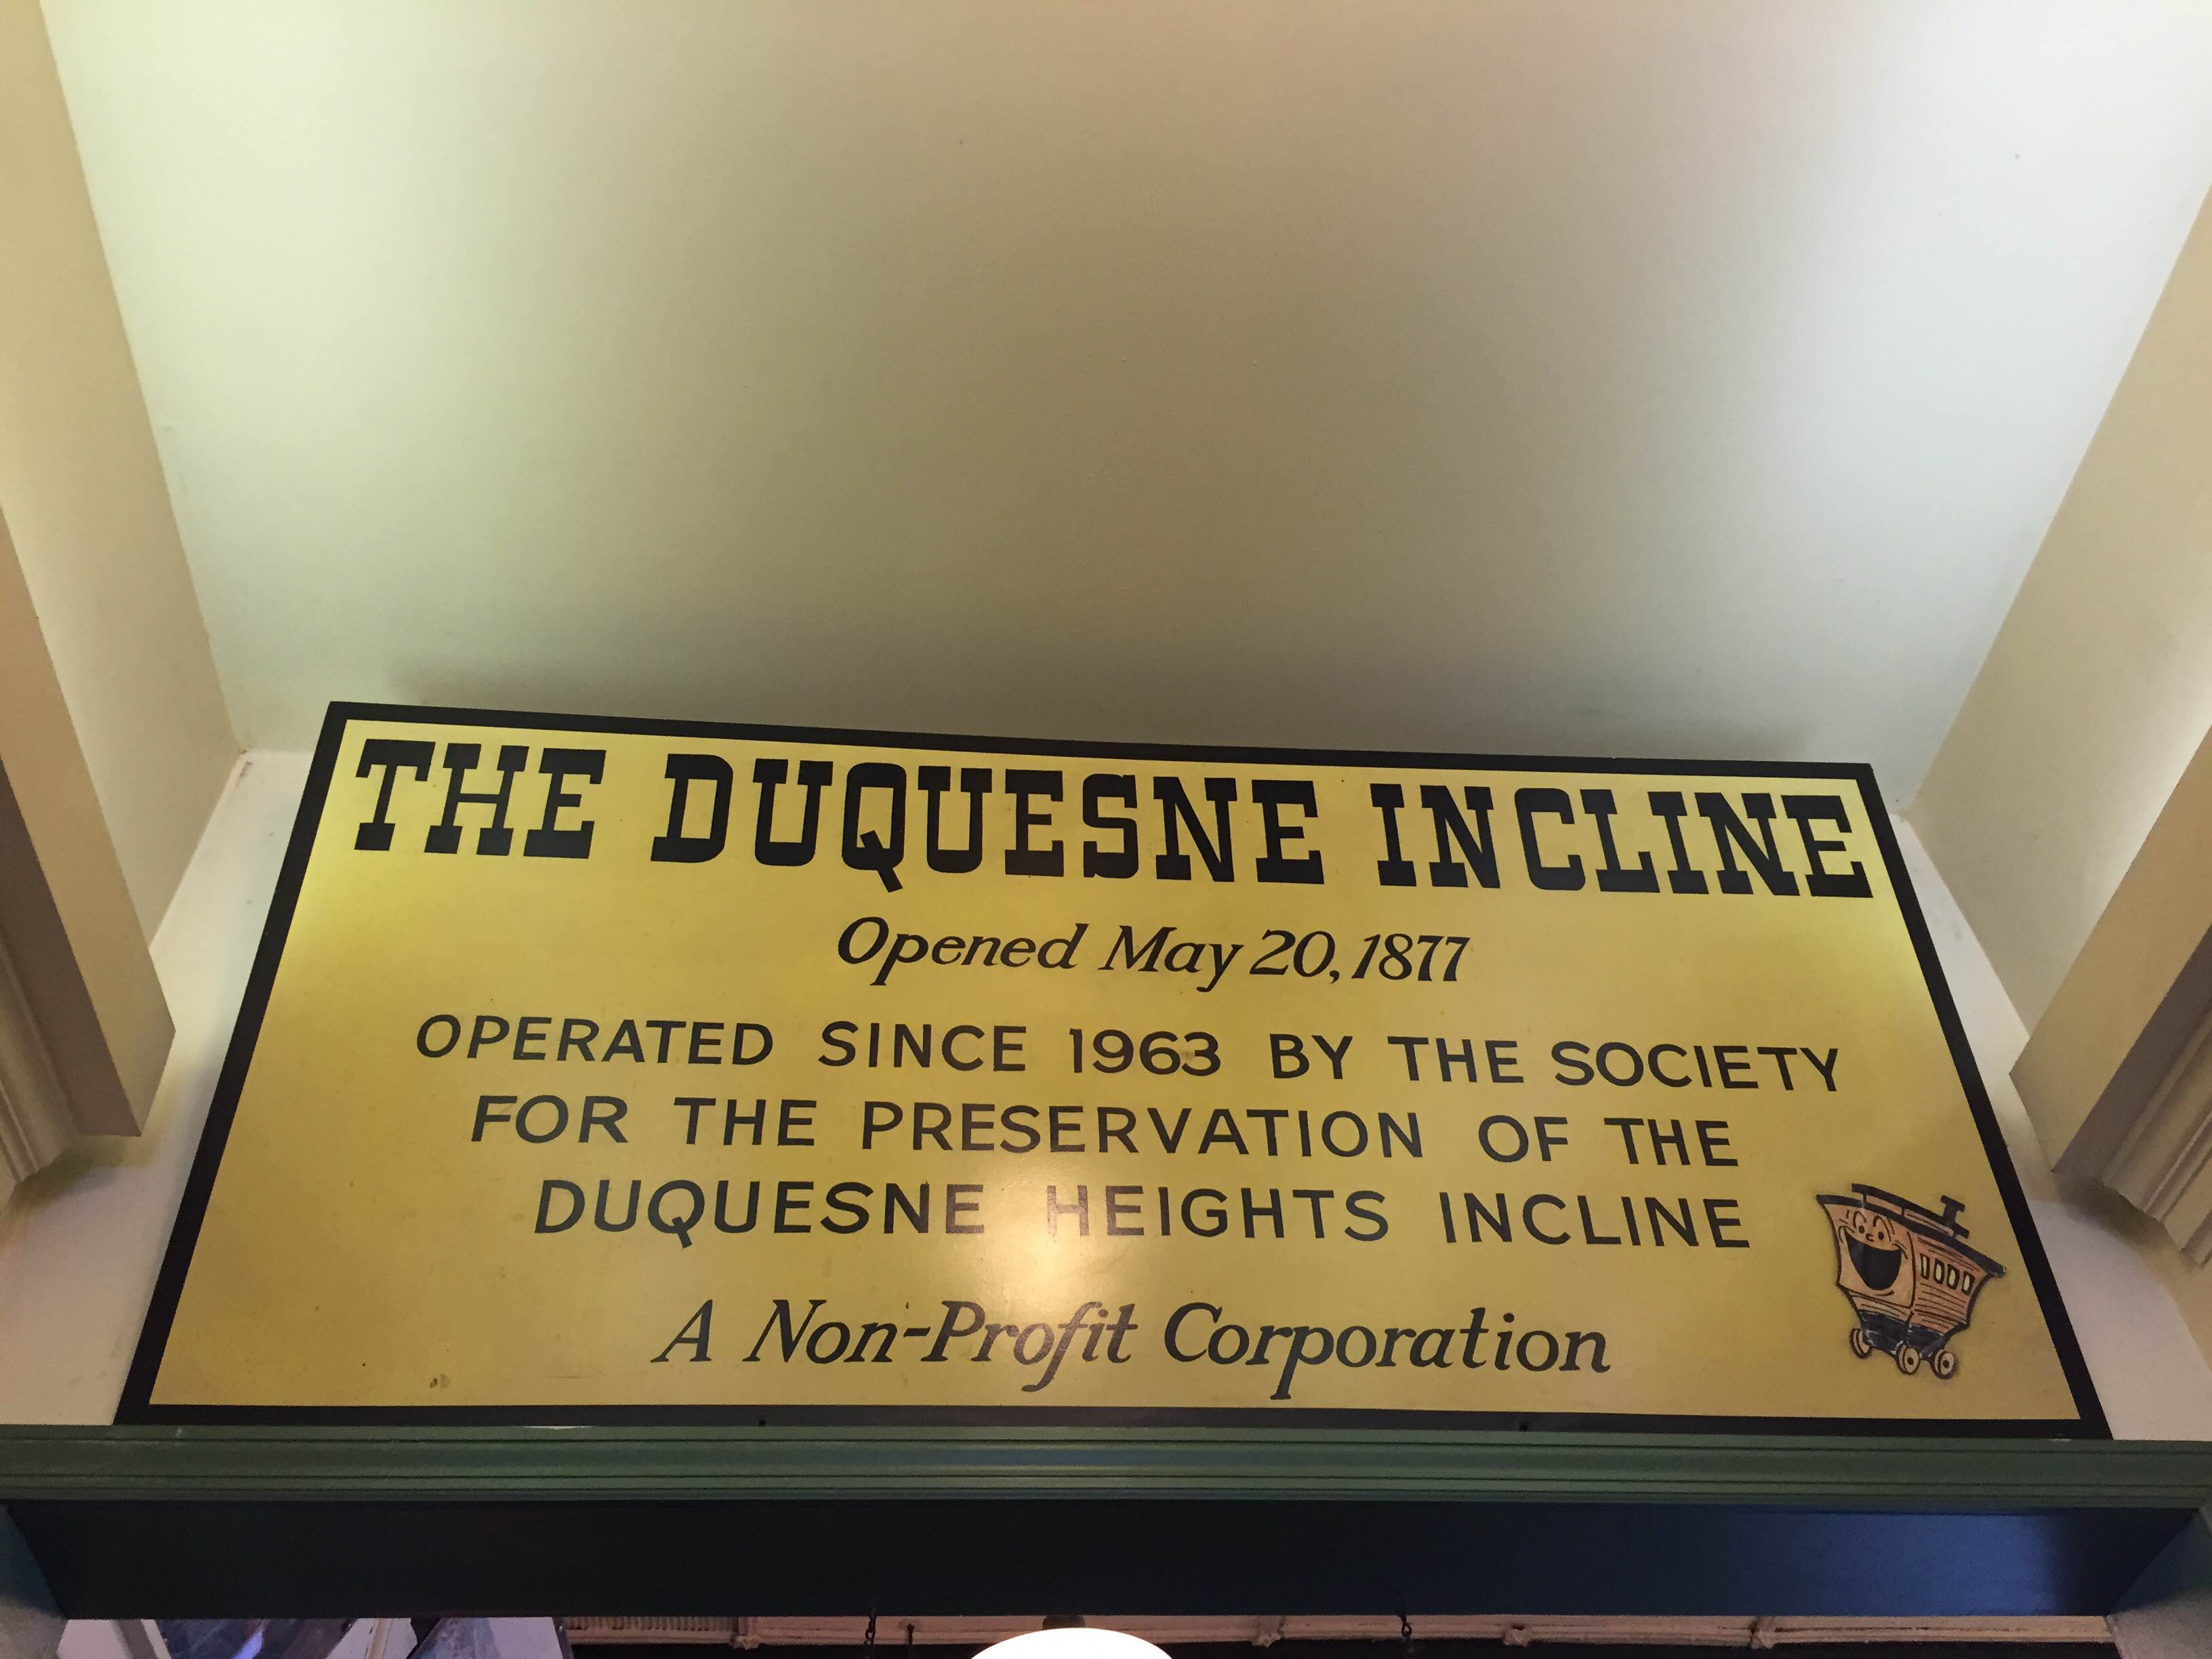 The Duquesne Incline has been running since 1877